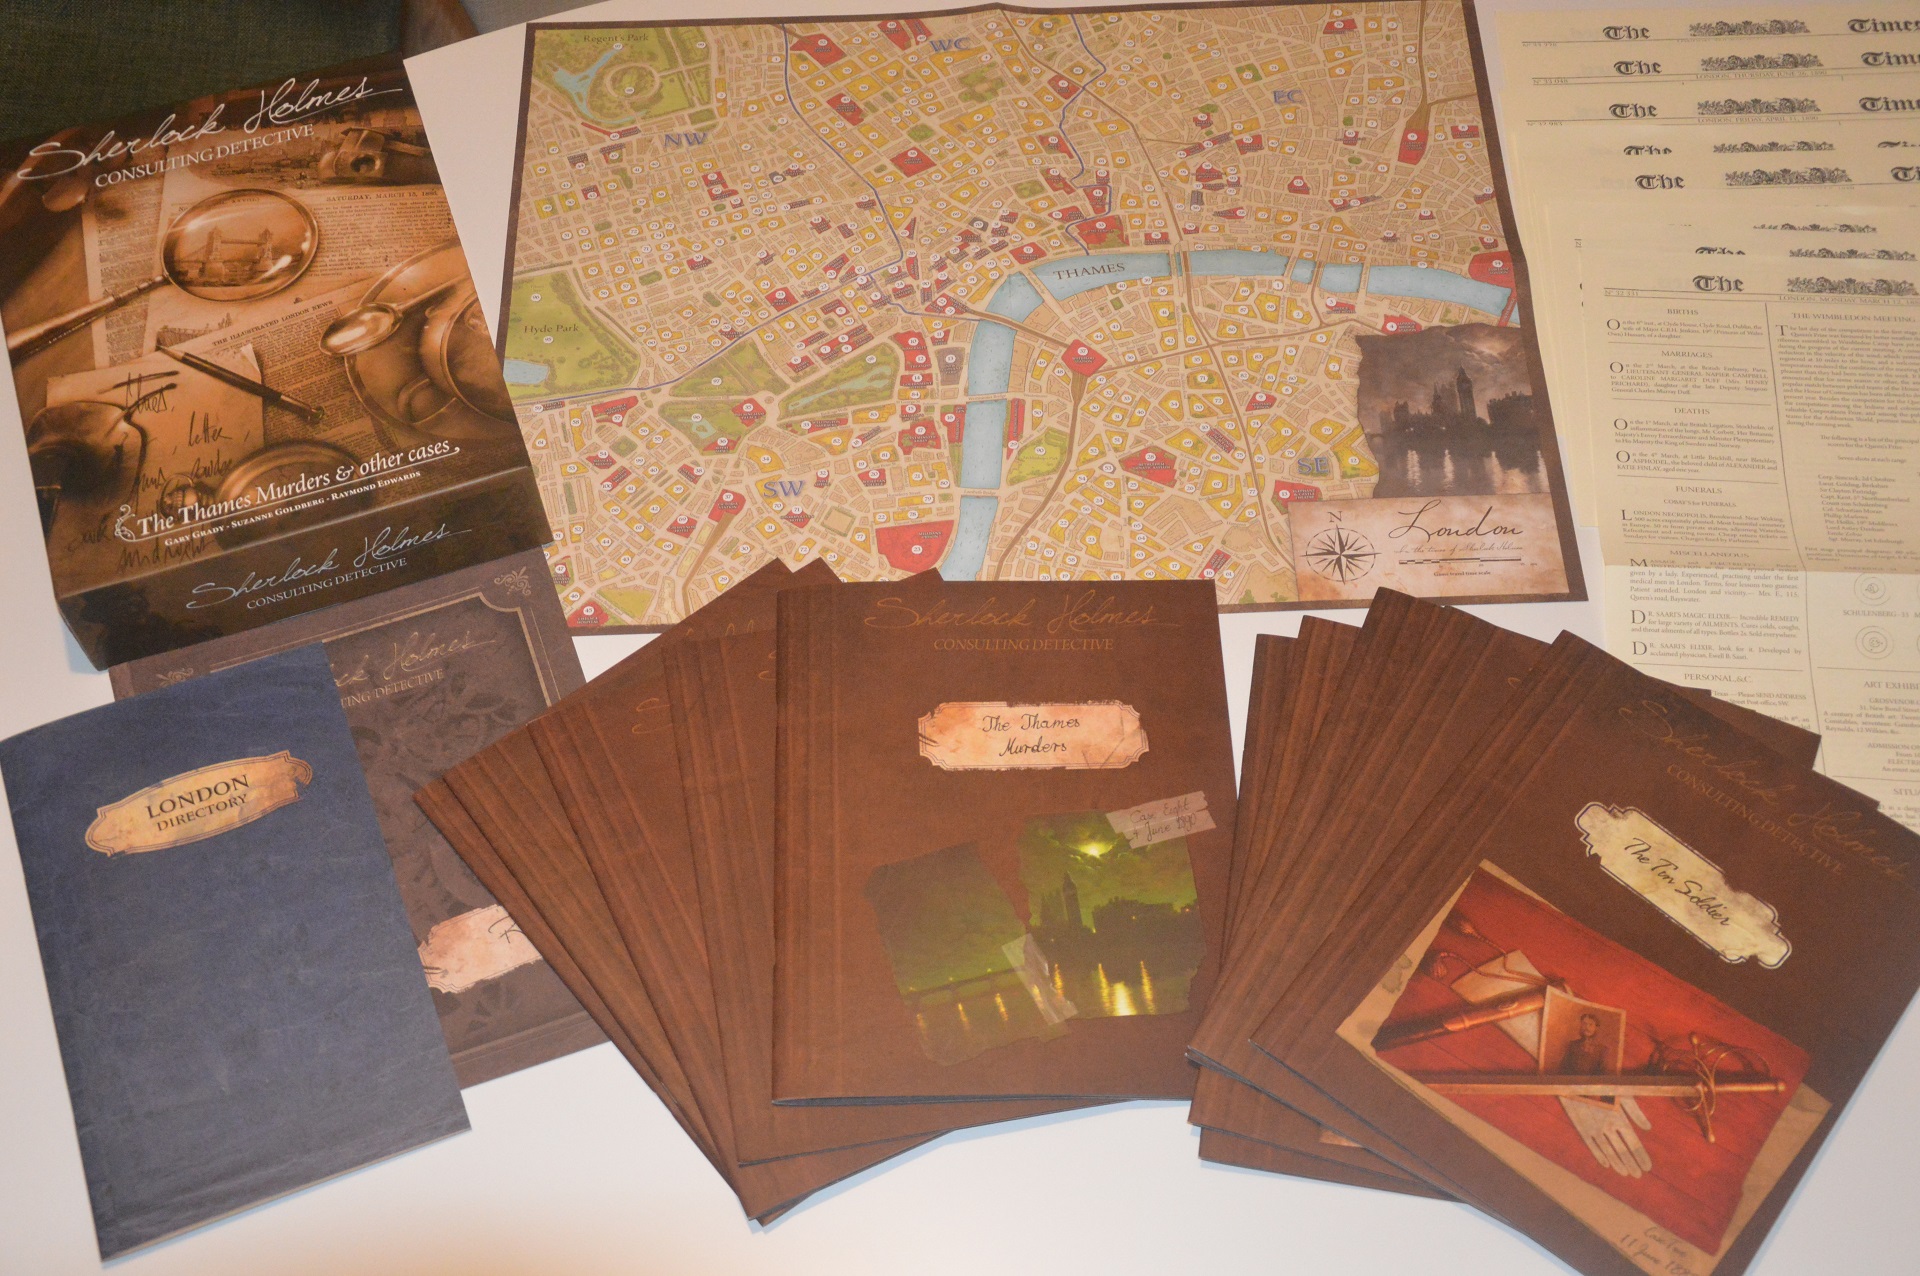 Sherlock Holmes Consulting Detective Thames Murders material